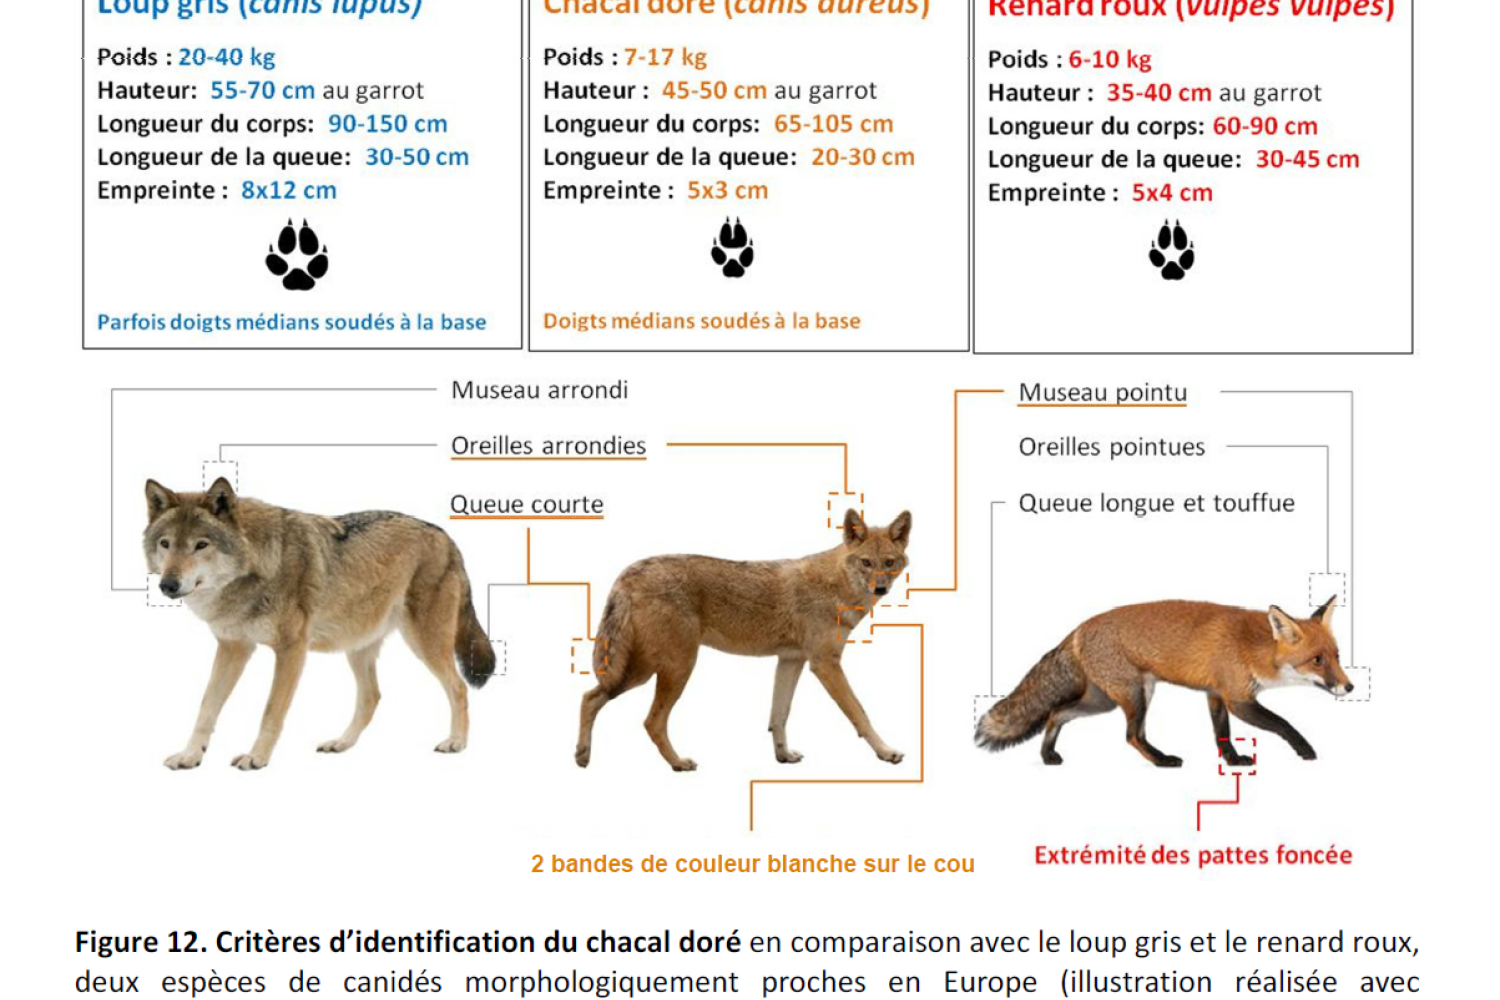 differences_loup_renard_chacal.png